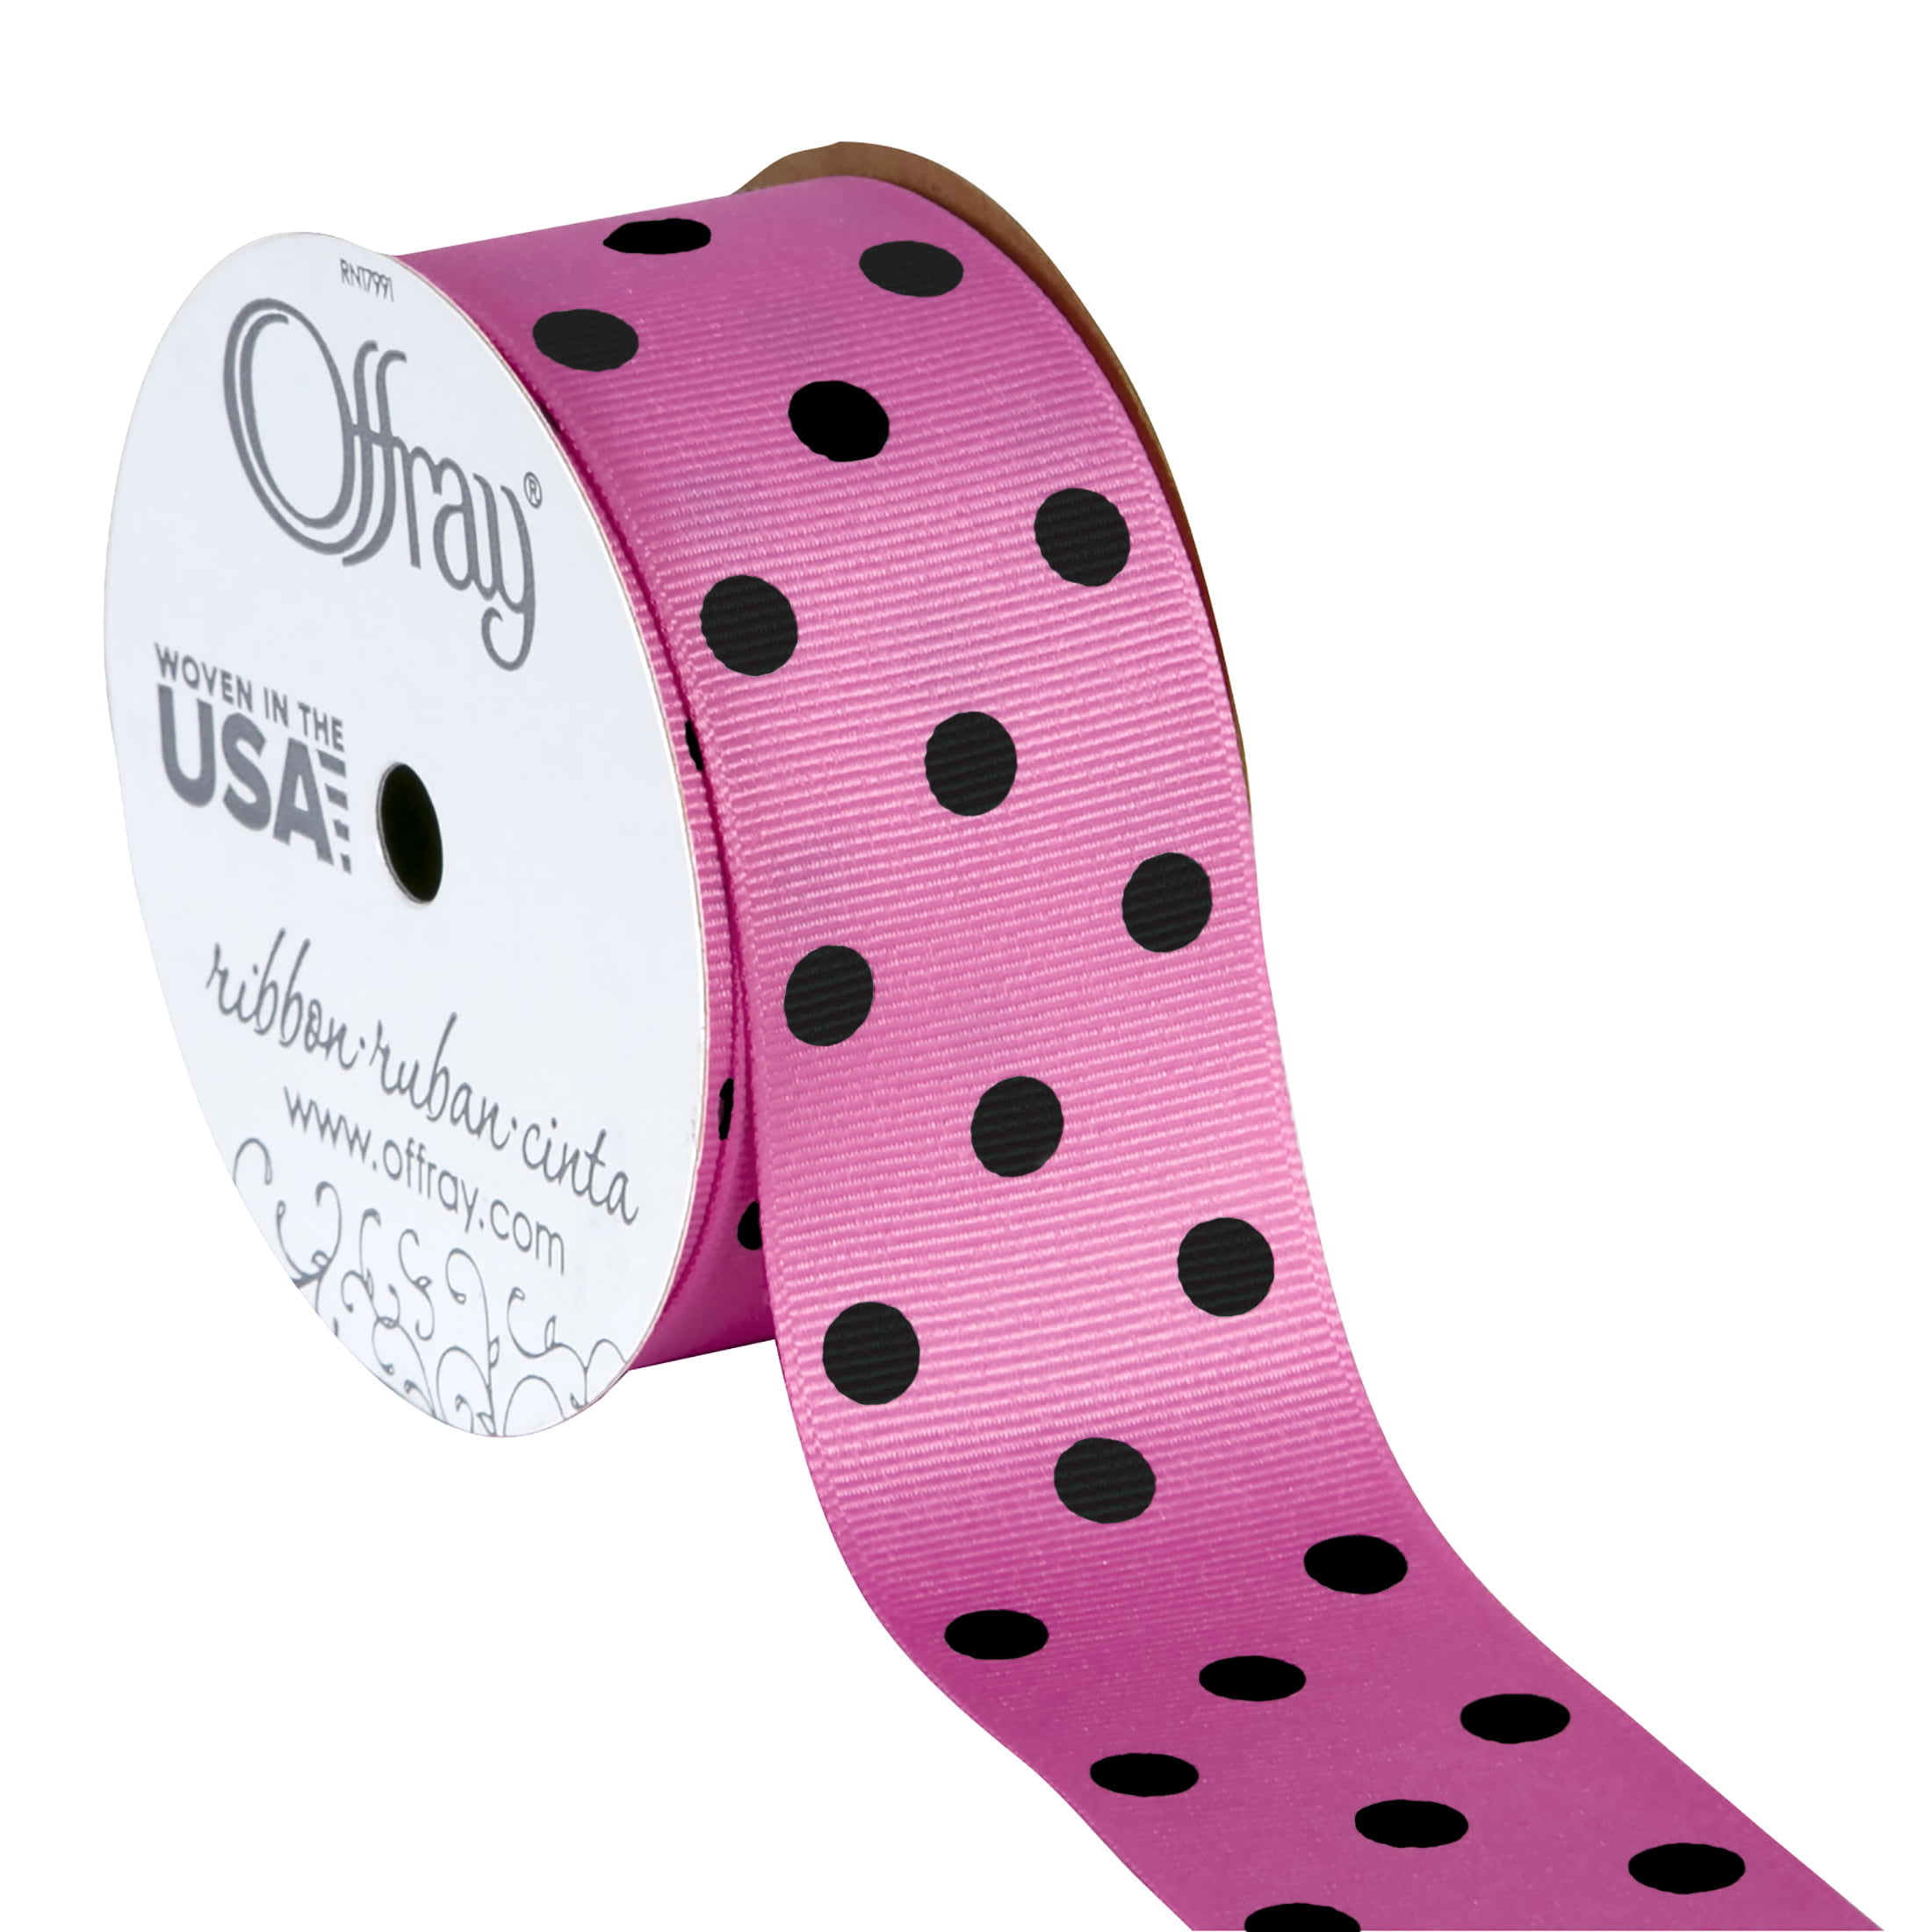 Offray Ribbon, Hot Pink with Black Polka Dots 1 1/2 inch Grosgrain